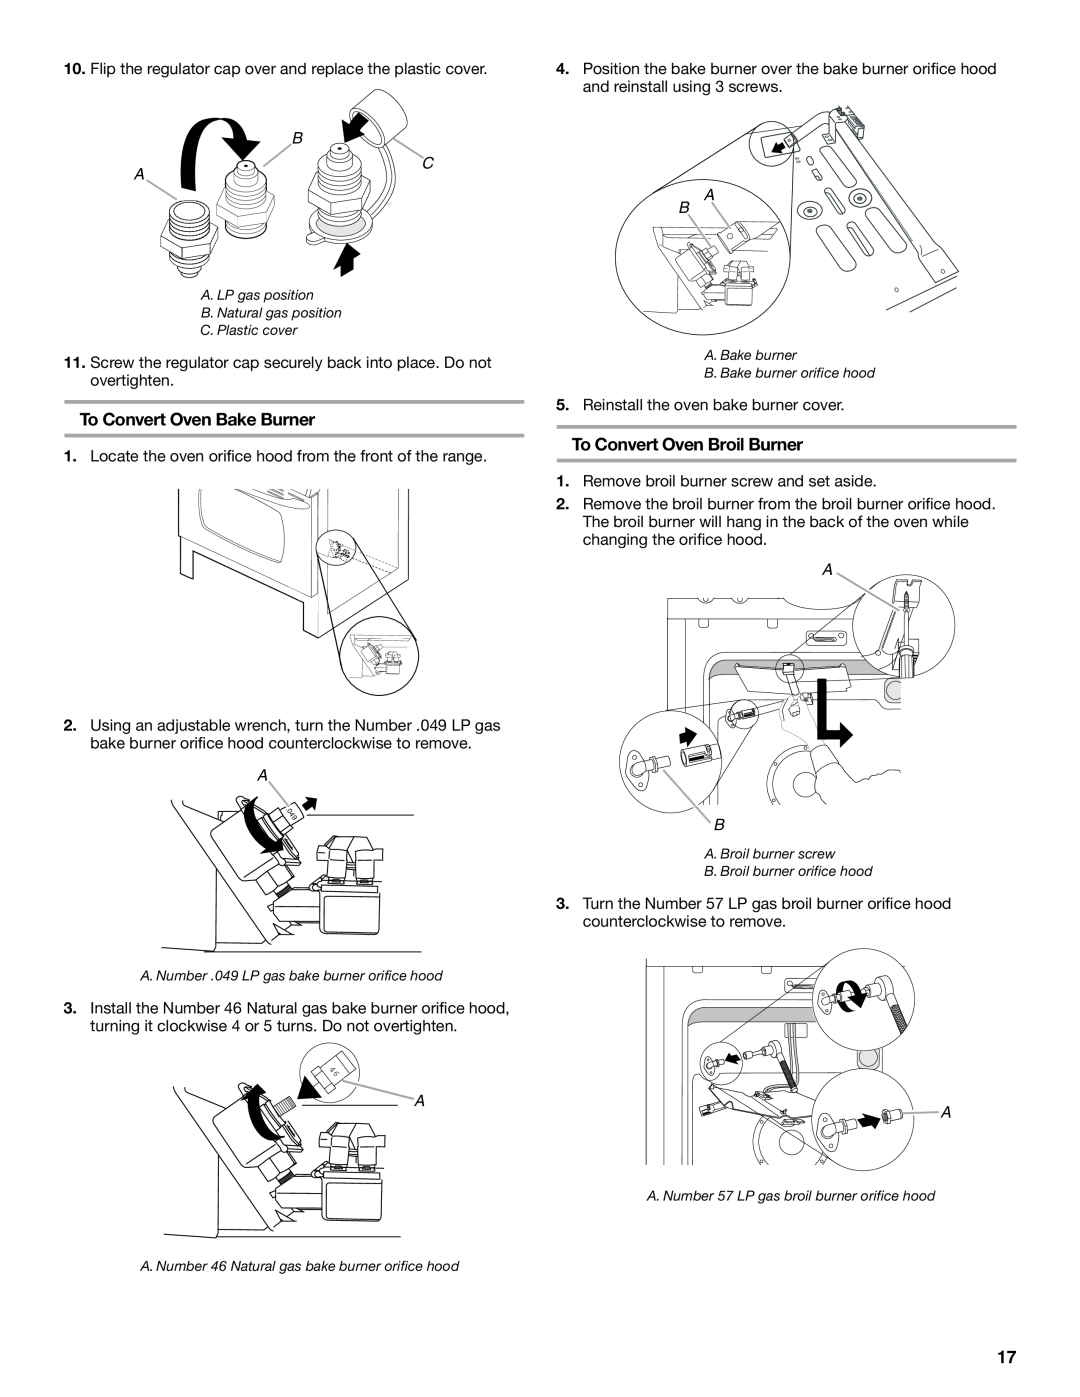 Maytag W10258096A installation instructions To Convert Oven Bake Burner, To Convert Oven Broil Burner 